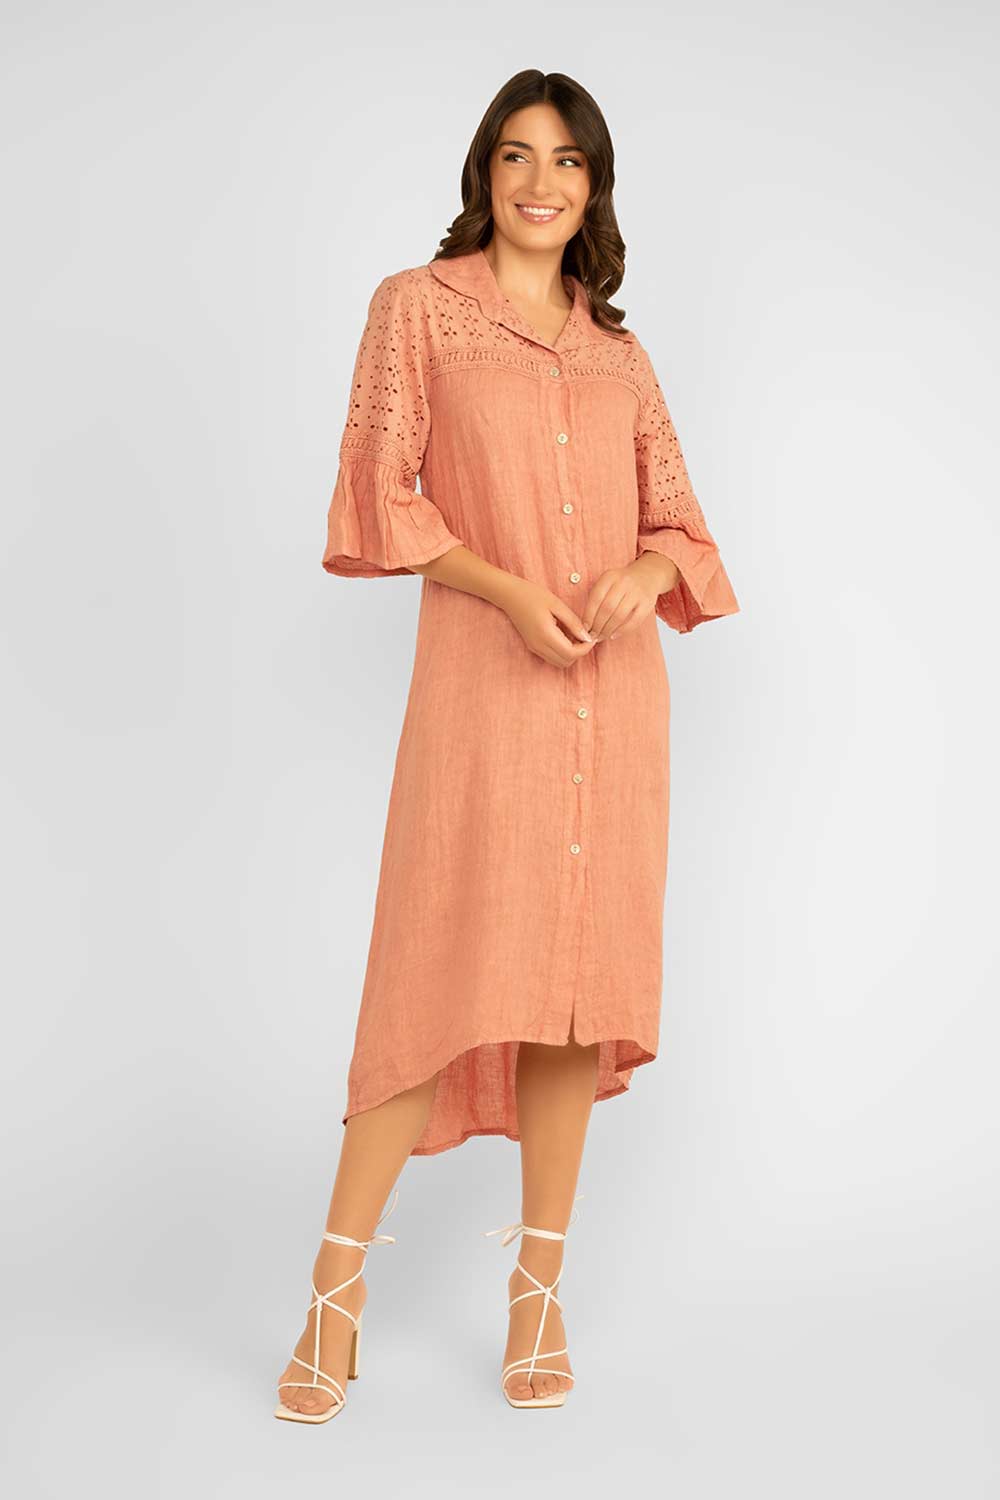 Women's Clothing BELLA AMORE (11385) Button Up Linen Dress in BLUSH